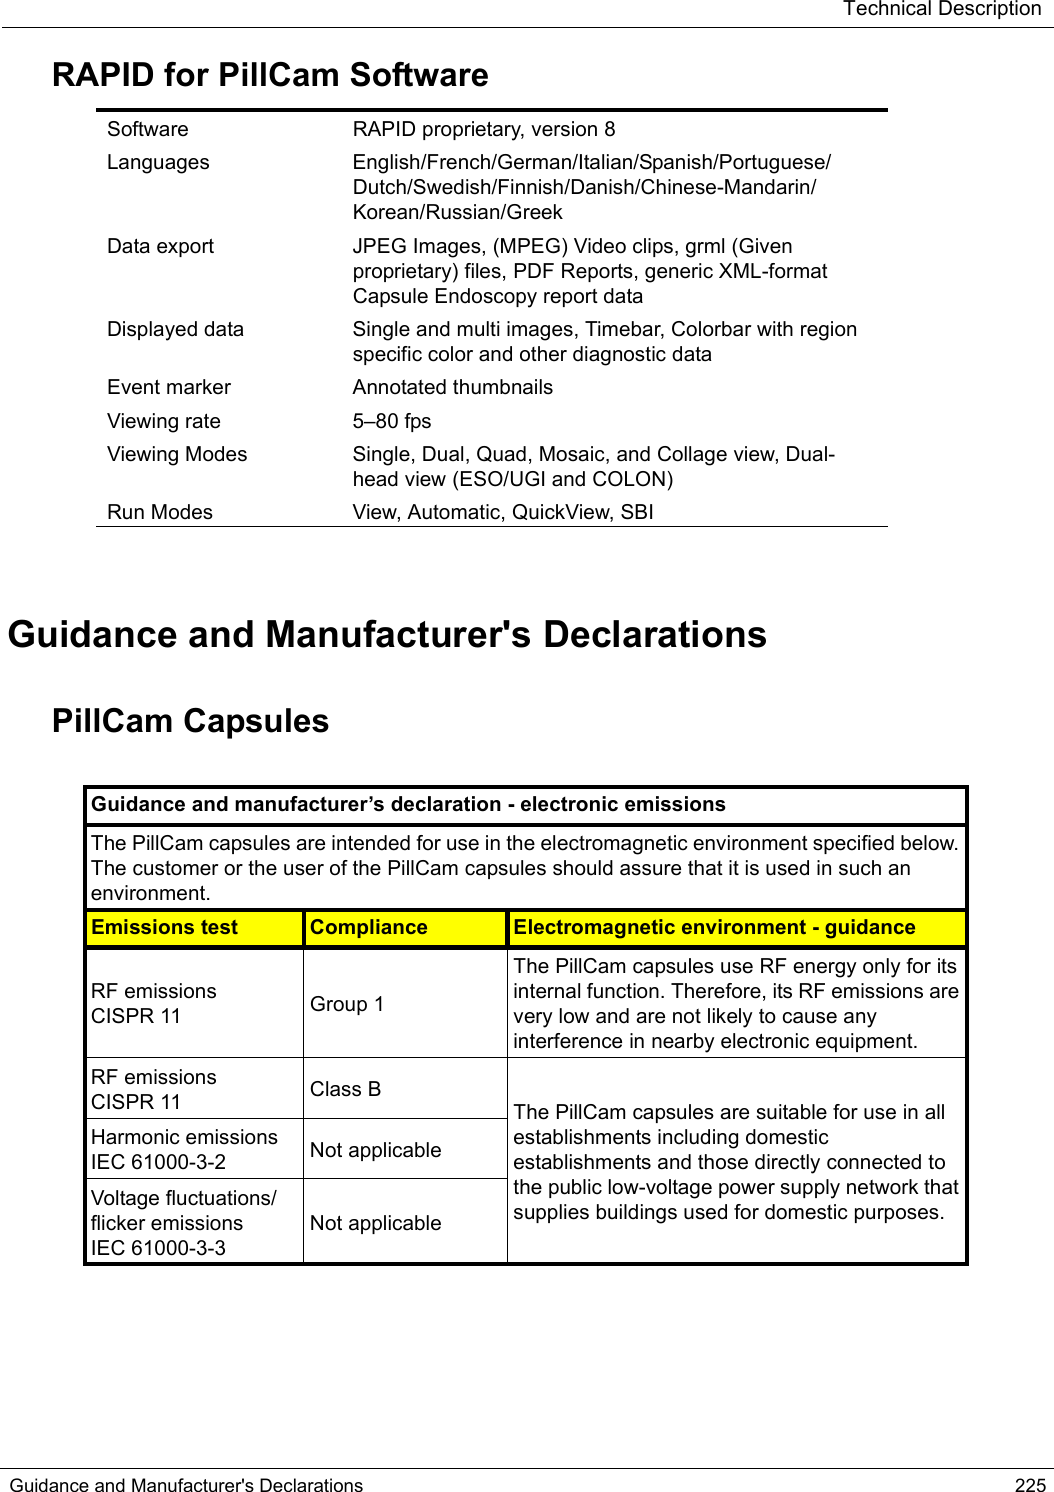 Technical DescriptionGuidance and Manufacturer&apos;s Declarations 225RAPID for PillCam SoftwareGuidance and Manufacturer&apos;s DeclarationsPillCam Capsules  Software RAPID proprietary, version 8Languages English/French/German/Italian/Spanish/Portuguese/Dutch/Swedish/Finnish/Danish/Chinese-Mandarin/Korean/Russian/Greek Data export JPEG Images, (MPEG) Video clips, grml (Given proprietary) files, PDF Reports, generic XML-format Capsule Endoscopy report dataDisplayed data Single and multi images, Timebar, Colorbar with region specific color and other diagnostic dataEvent marker Annotated thumbnailsViewing rate 5–80 fpsViewing Modes Single, Dual, Quad, Mosaic, and Collage view, Dual-head view (ESO/UGI and COLON)Run Modes View, Automatic, QuickView, SBI Guidance and manufacturer’s declaration - electronic emissionsThe PillCam capsules are intended for use in the electromagnetic environment specified below. The customer or the user of the PillCam capsules should assure that it is used in such an environment.Emissions test Compliance Electromagnetic environment - guidanceRF emissionsCISPR 11 Group 1The PillCam capsules use RF energy only for its internal function. Therefore, its RF emissions are very low and are not likely to cause any interference in nearby electronic equipment.RF emissionsCISPR 11 Class BThe PillCam capsules are suitable for use in all establishments including domestic establishments and those directly connected to the public low-voltage power supply network that supplies buildings used for domestic purposes.Harmonic emissionsIEC 61000-3-2 Not applicableVoltage fluctuations/flicker emissionsIEC 61000-3-3Not applicable